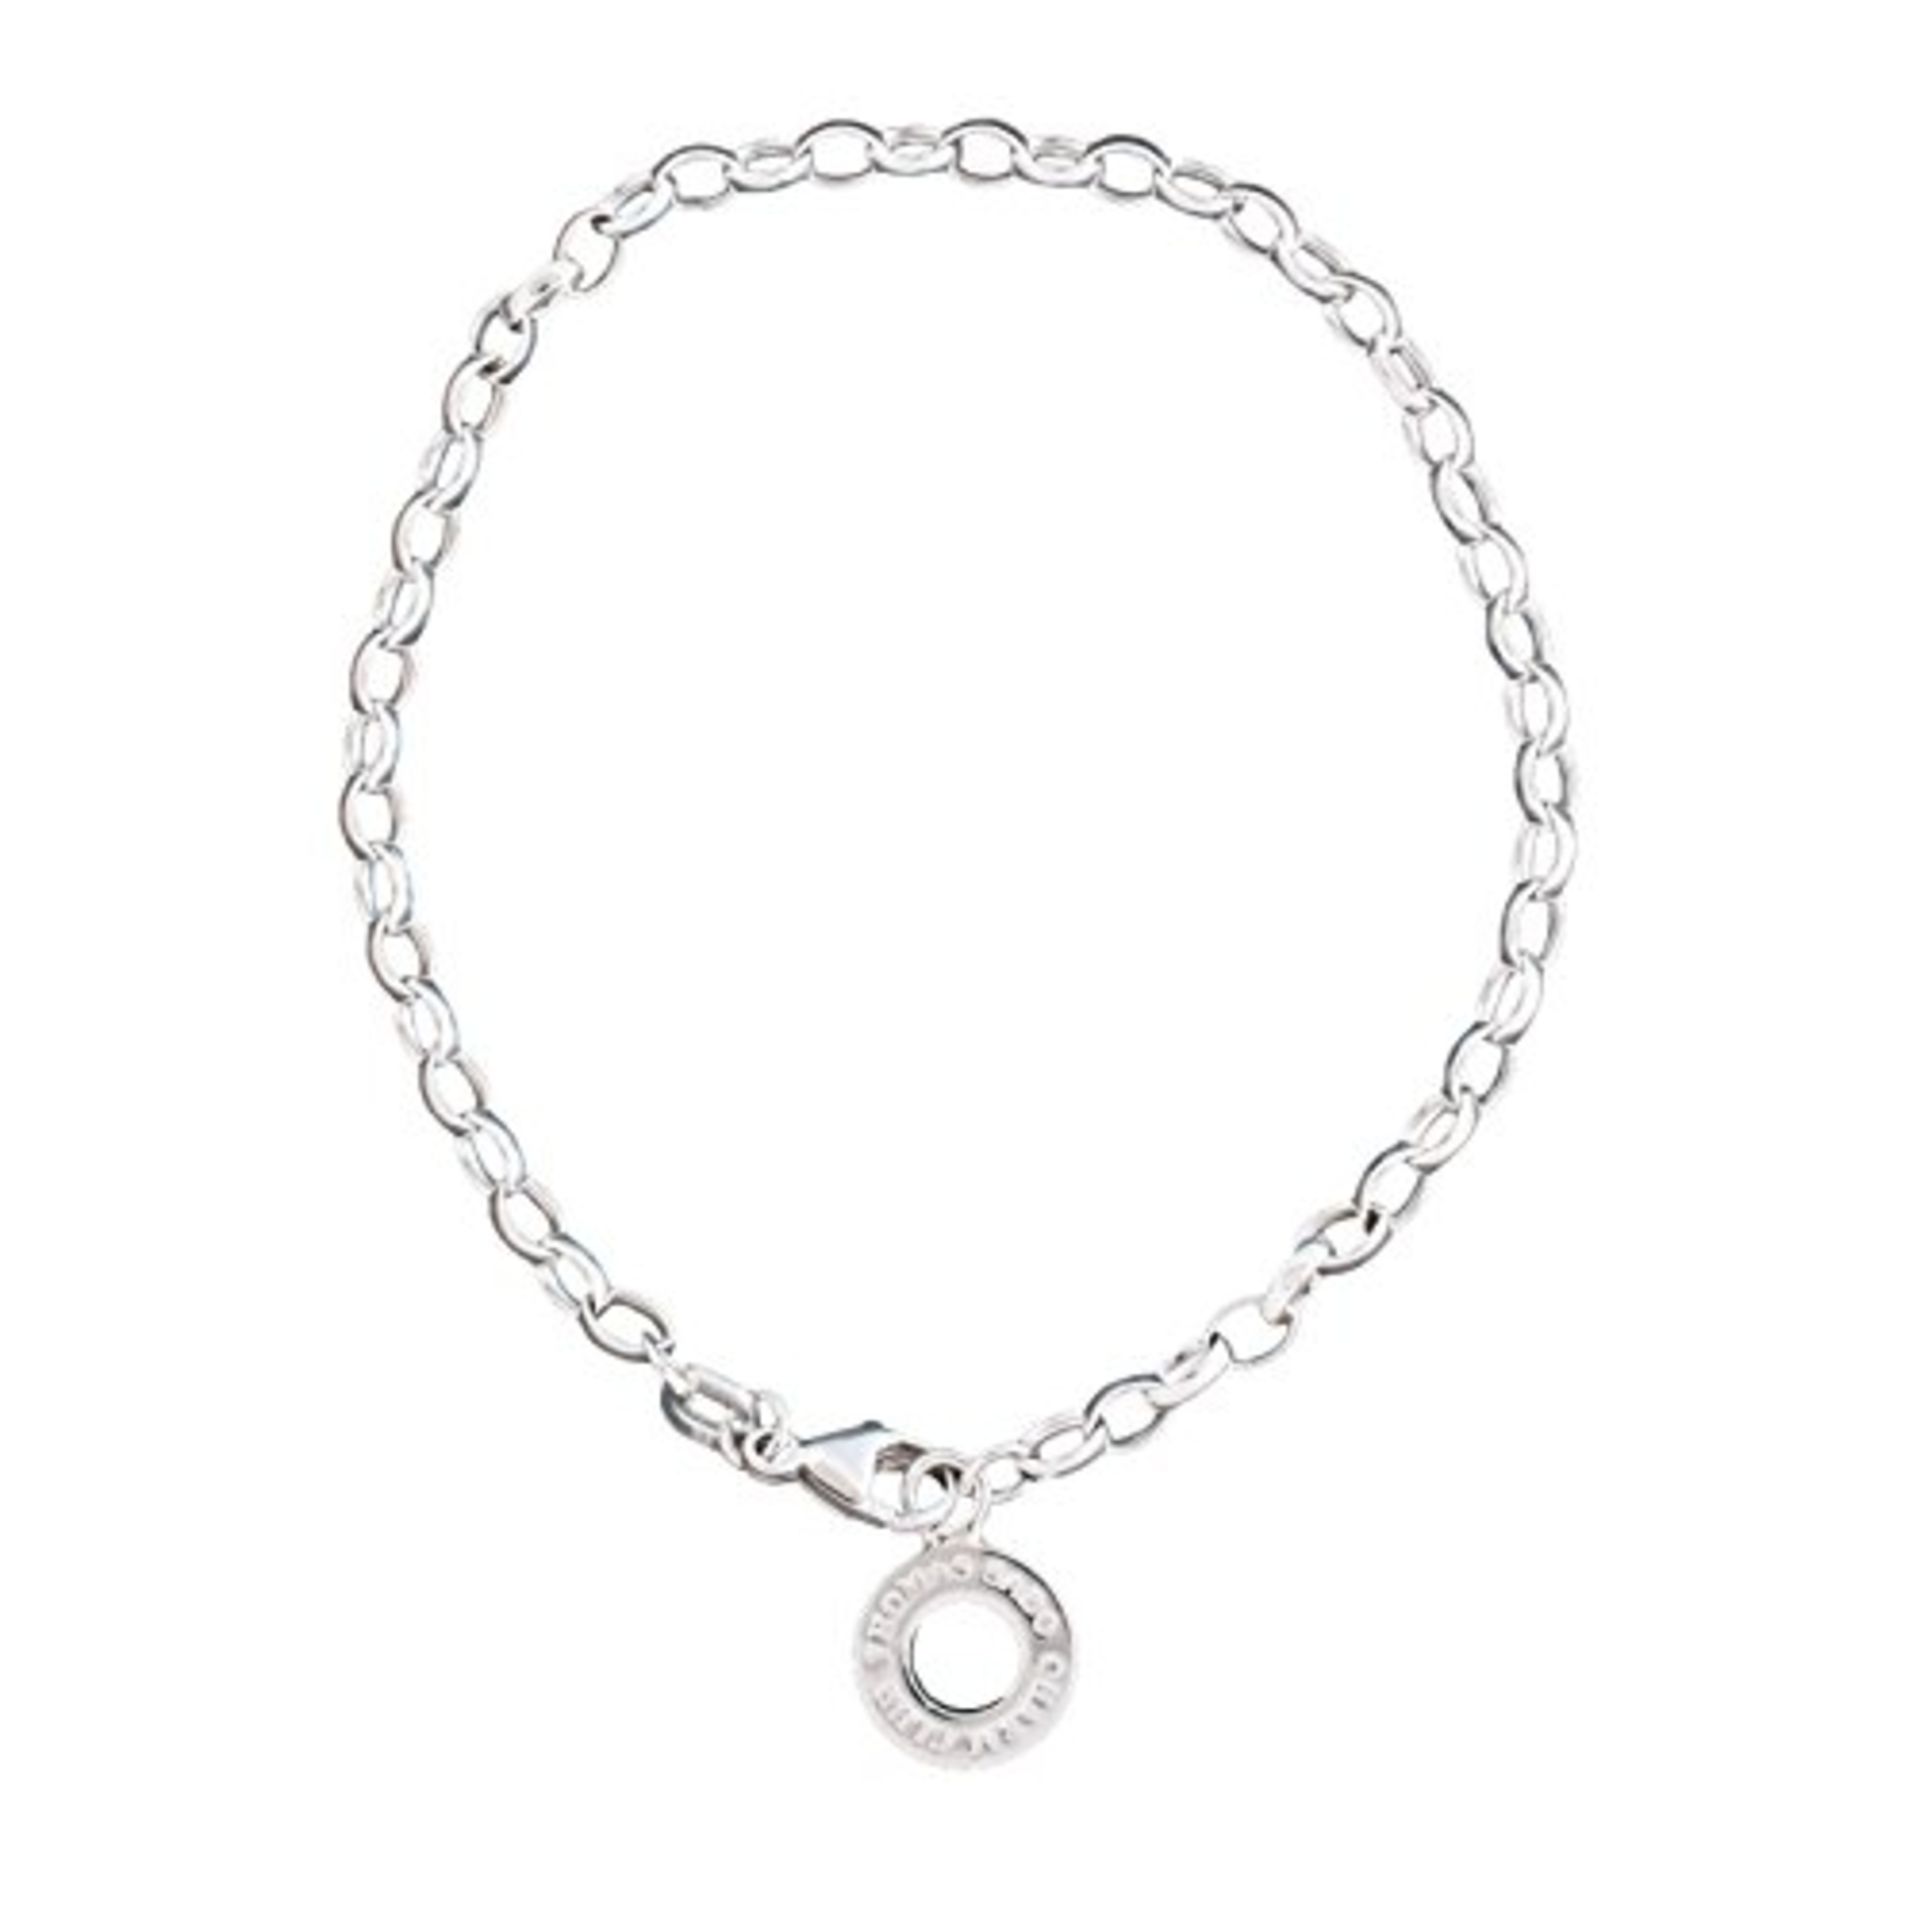 Thomas Sabo Women Charm Anklet Charm Club 925 Sterling Silver X0034-001-12 - Image 4 of 6